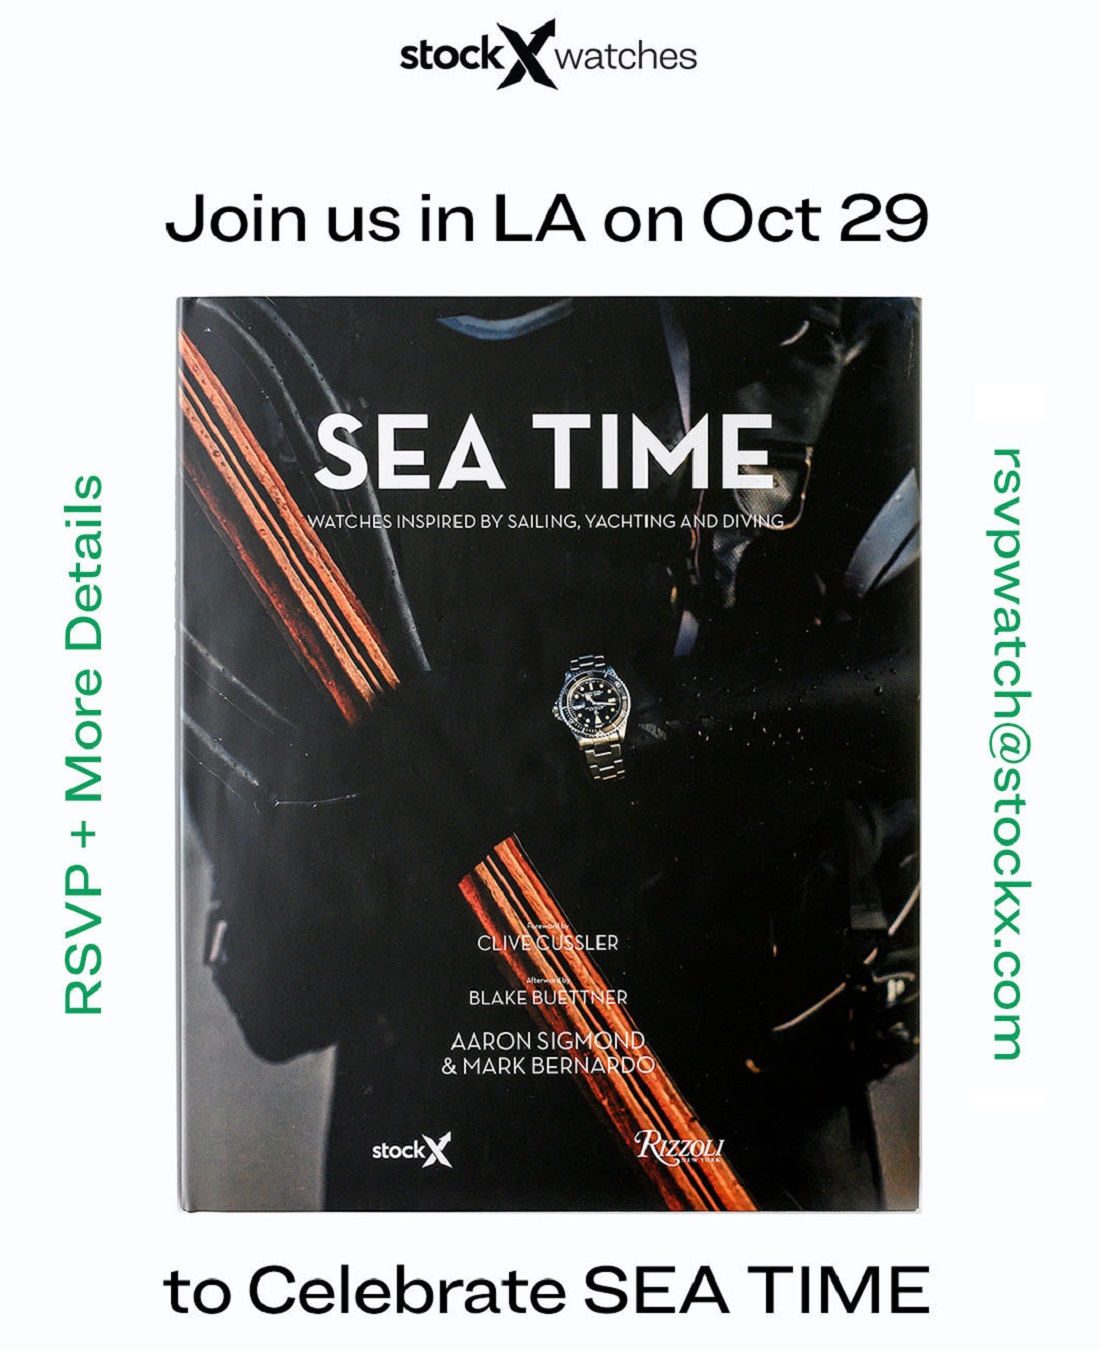 SEA TIME Book Party & Speaking Event In Los Angeles On October 29